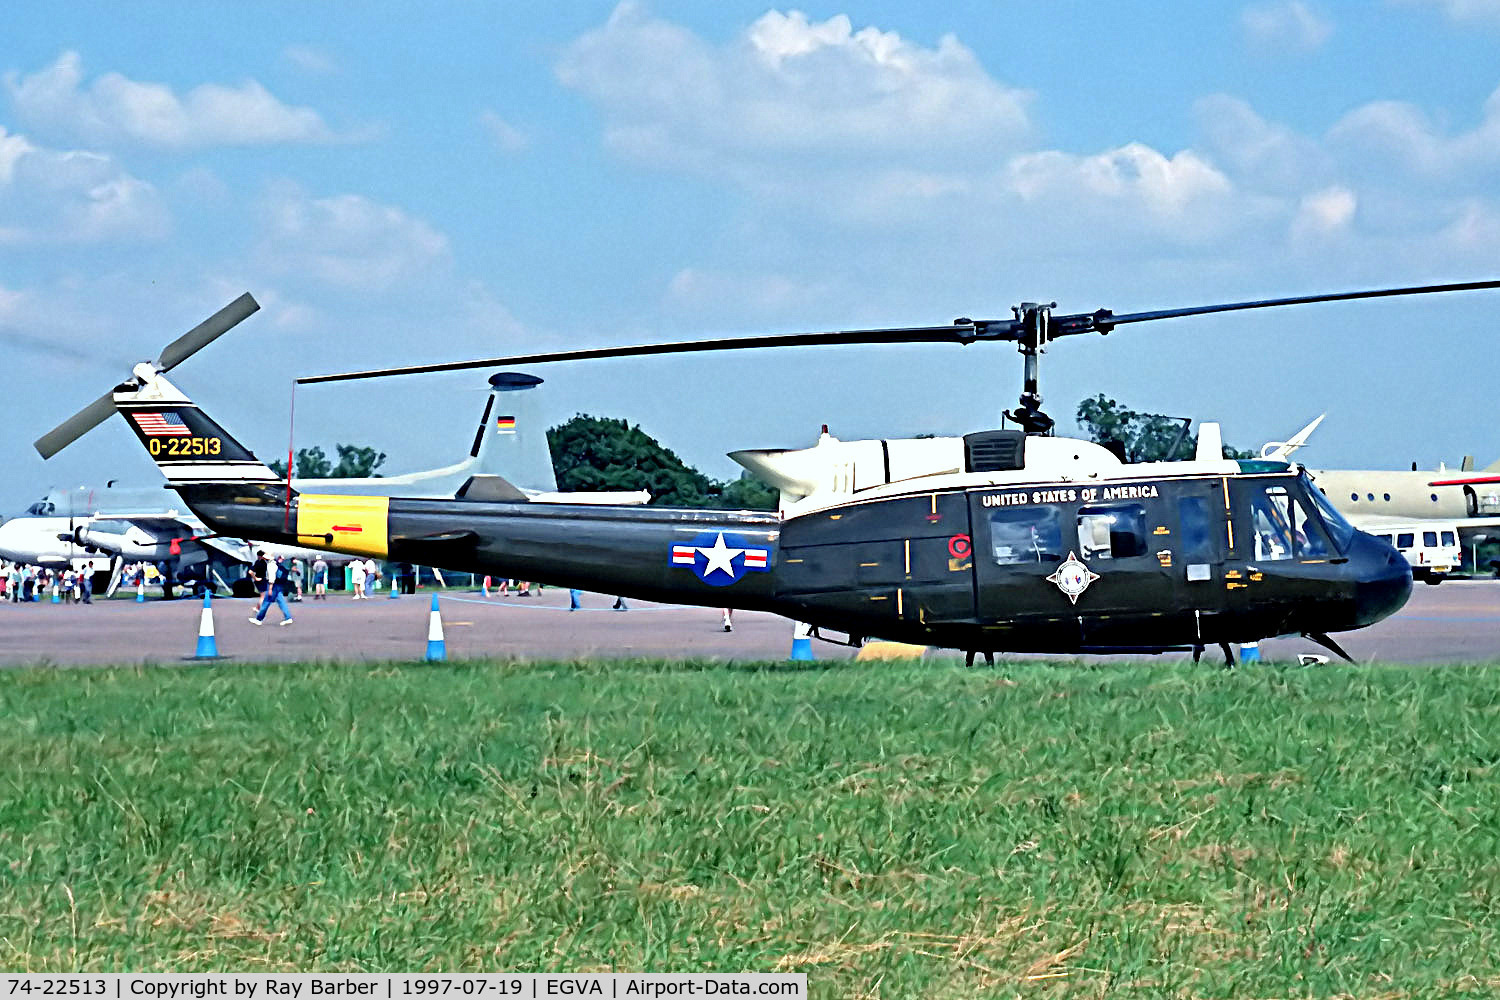 74-22513, 1974 Bell UH-1H Iroquois C/N 13837, 74-22513   (0-22513) Bell UH-1H Iroquois [13837] (United States Army) RAF Fairford~G 19/07/1997